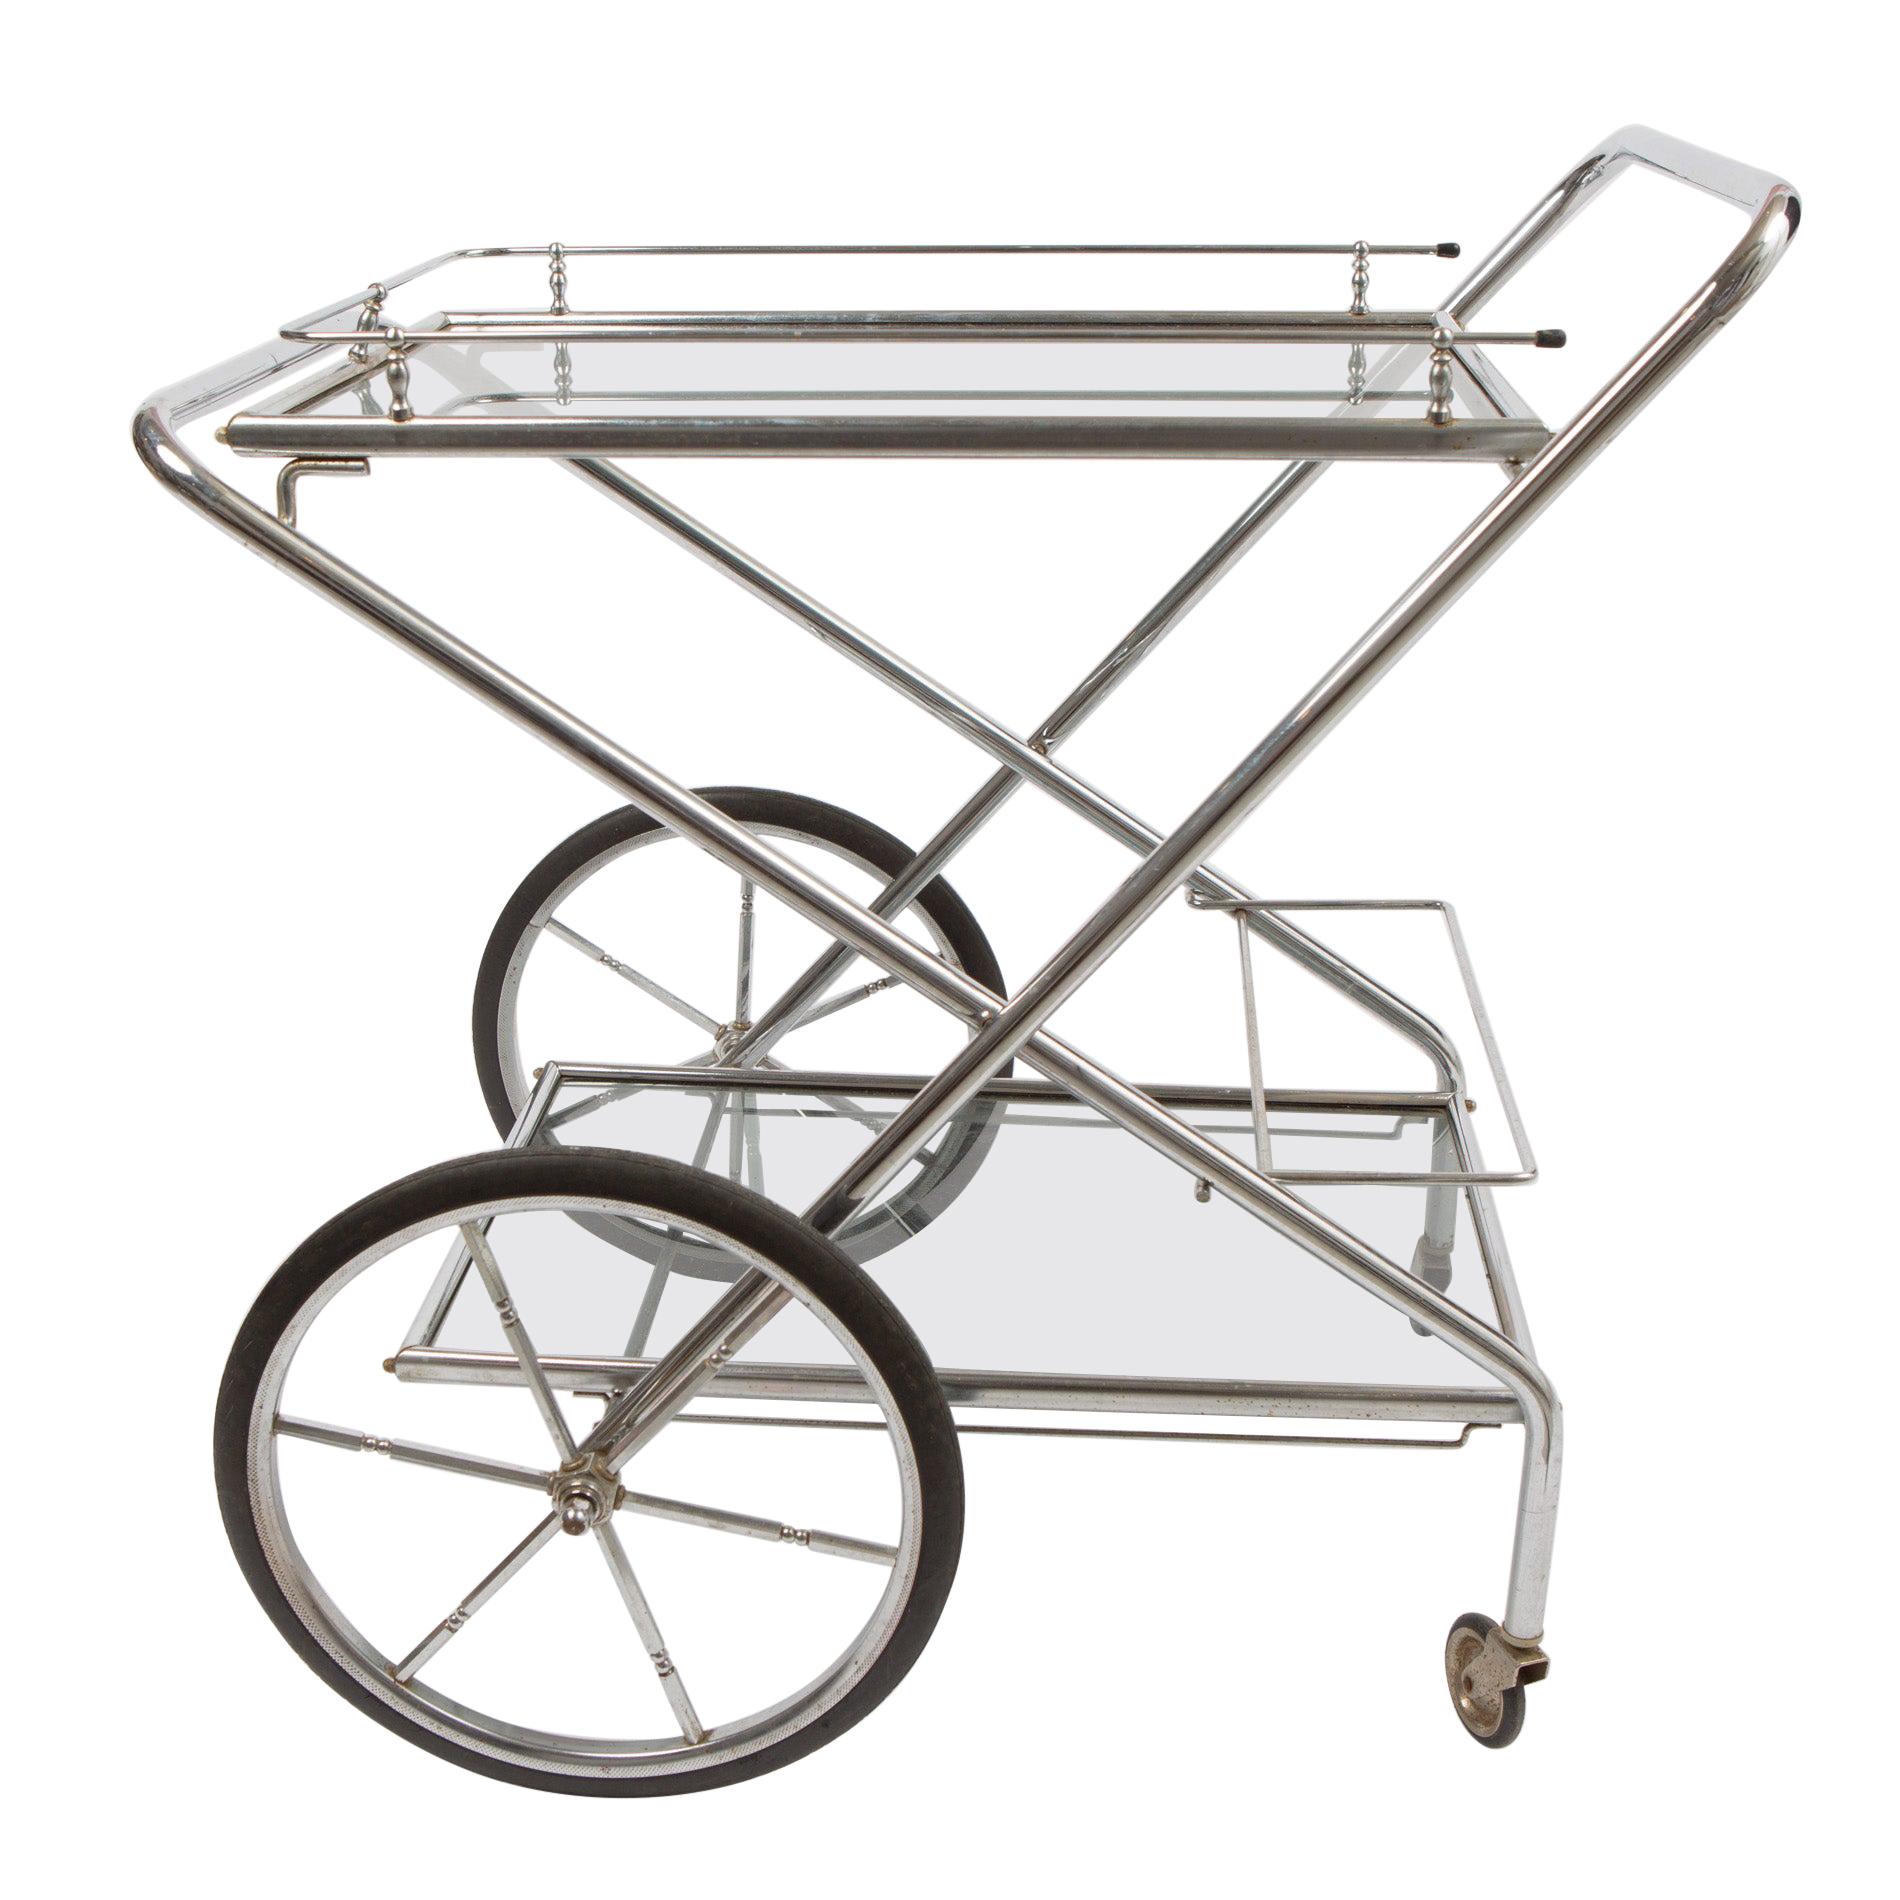 1960s French Chrome and Glass Drinks Trolley